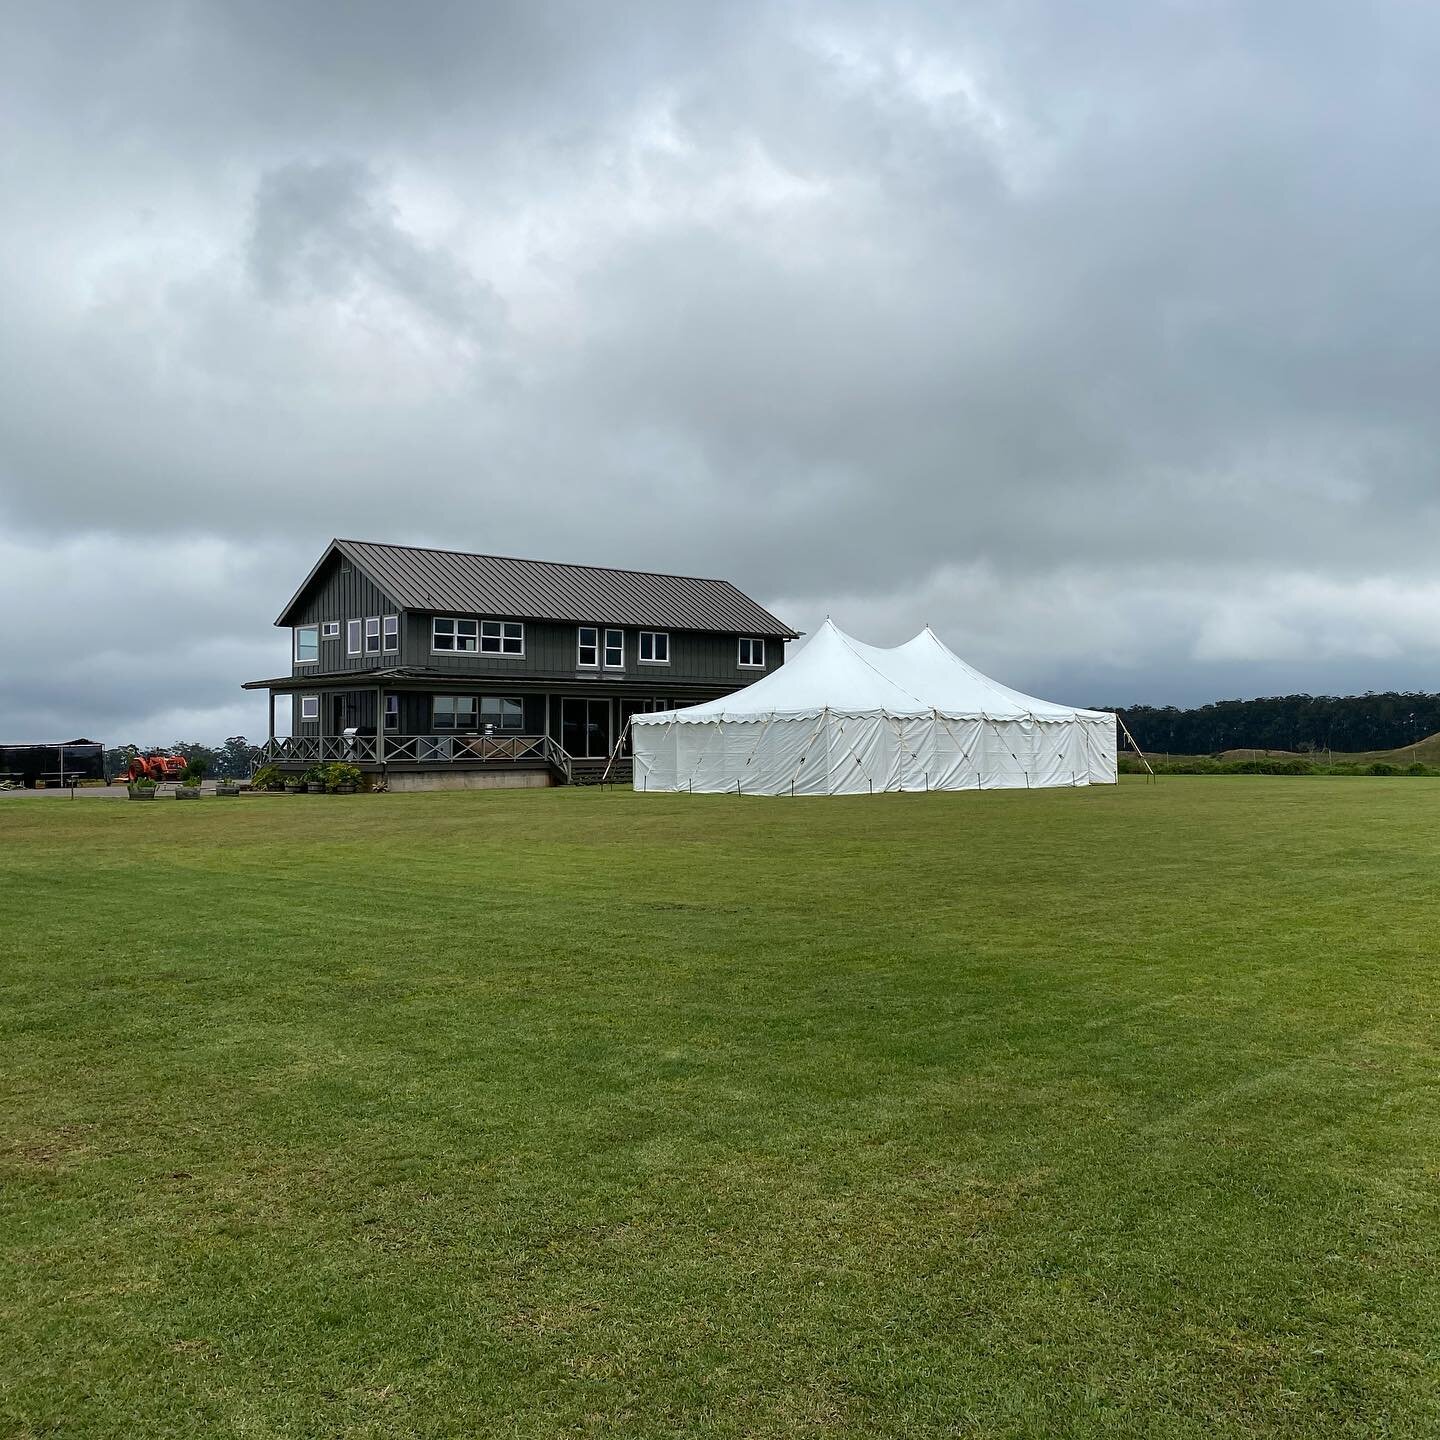 30x pole tent with sides, lighting, tables, chairs, linens, and heaters for birthday party in Waimea. @bigislandtents #bigislandtents #bit30xpole @bubs